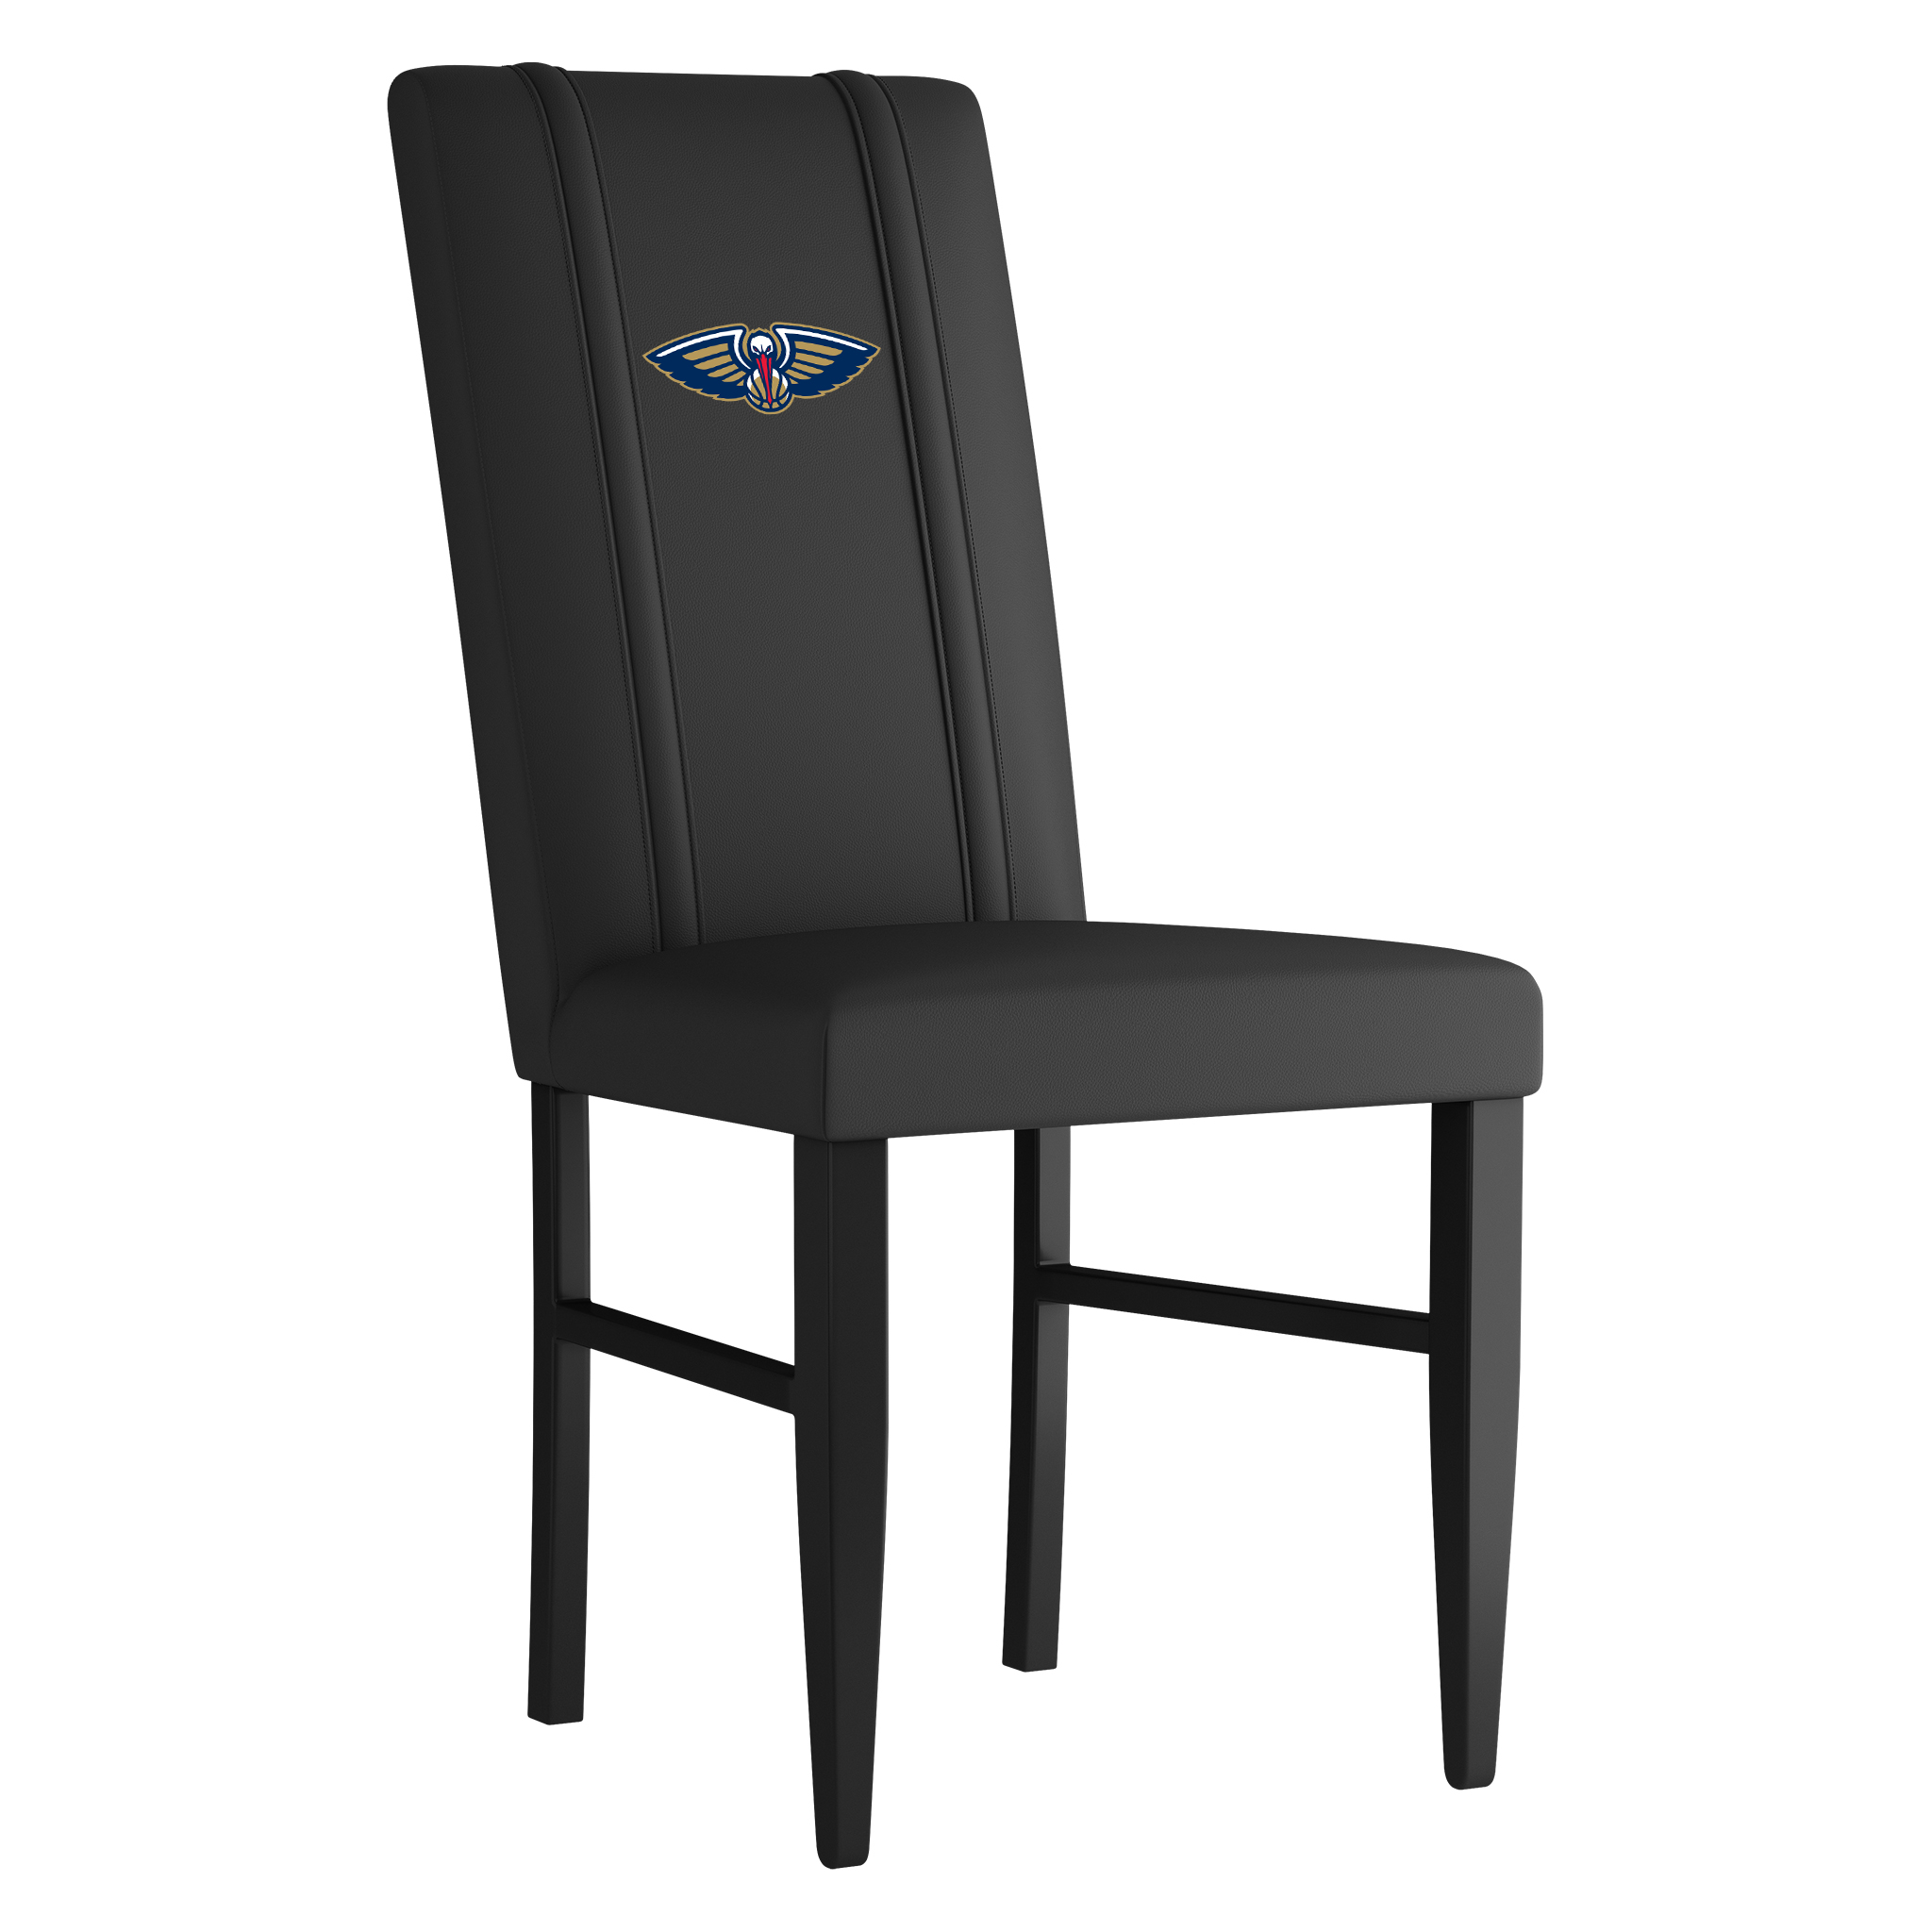 New Orleans Pelicans Side Chair 2000 With New Orleans Pelicans Primary Logo